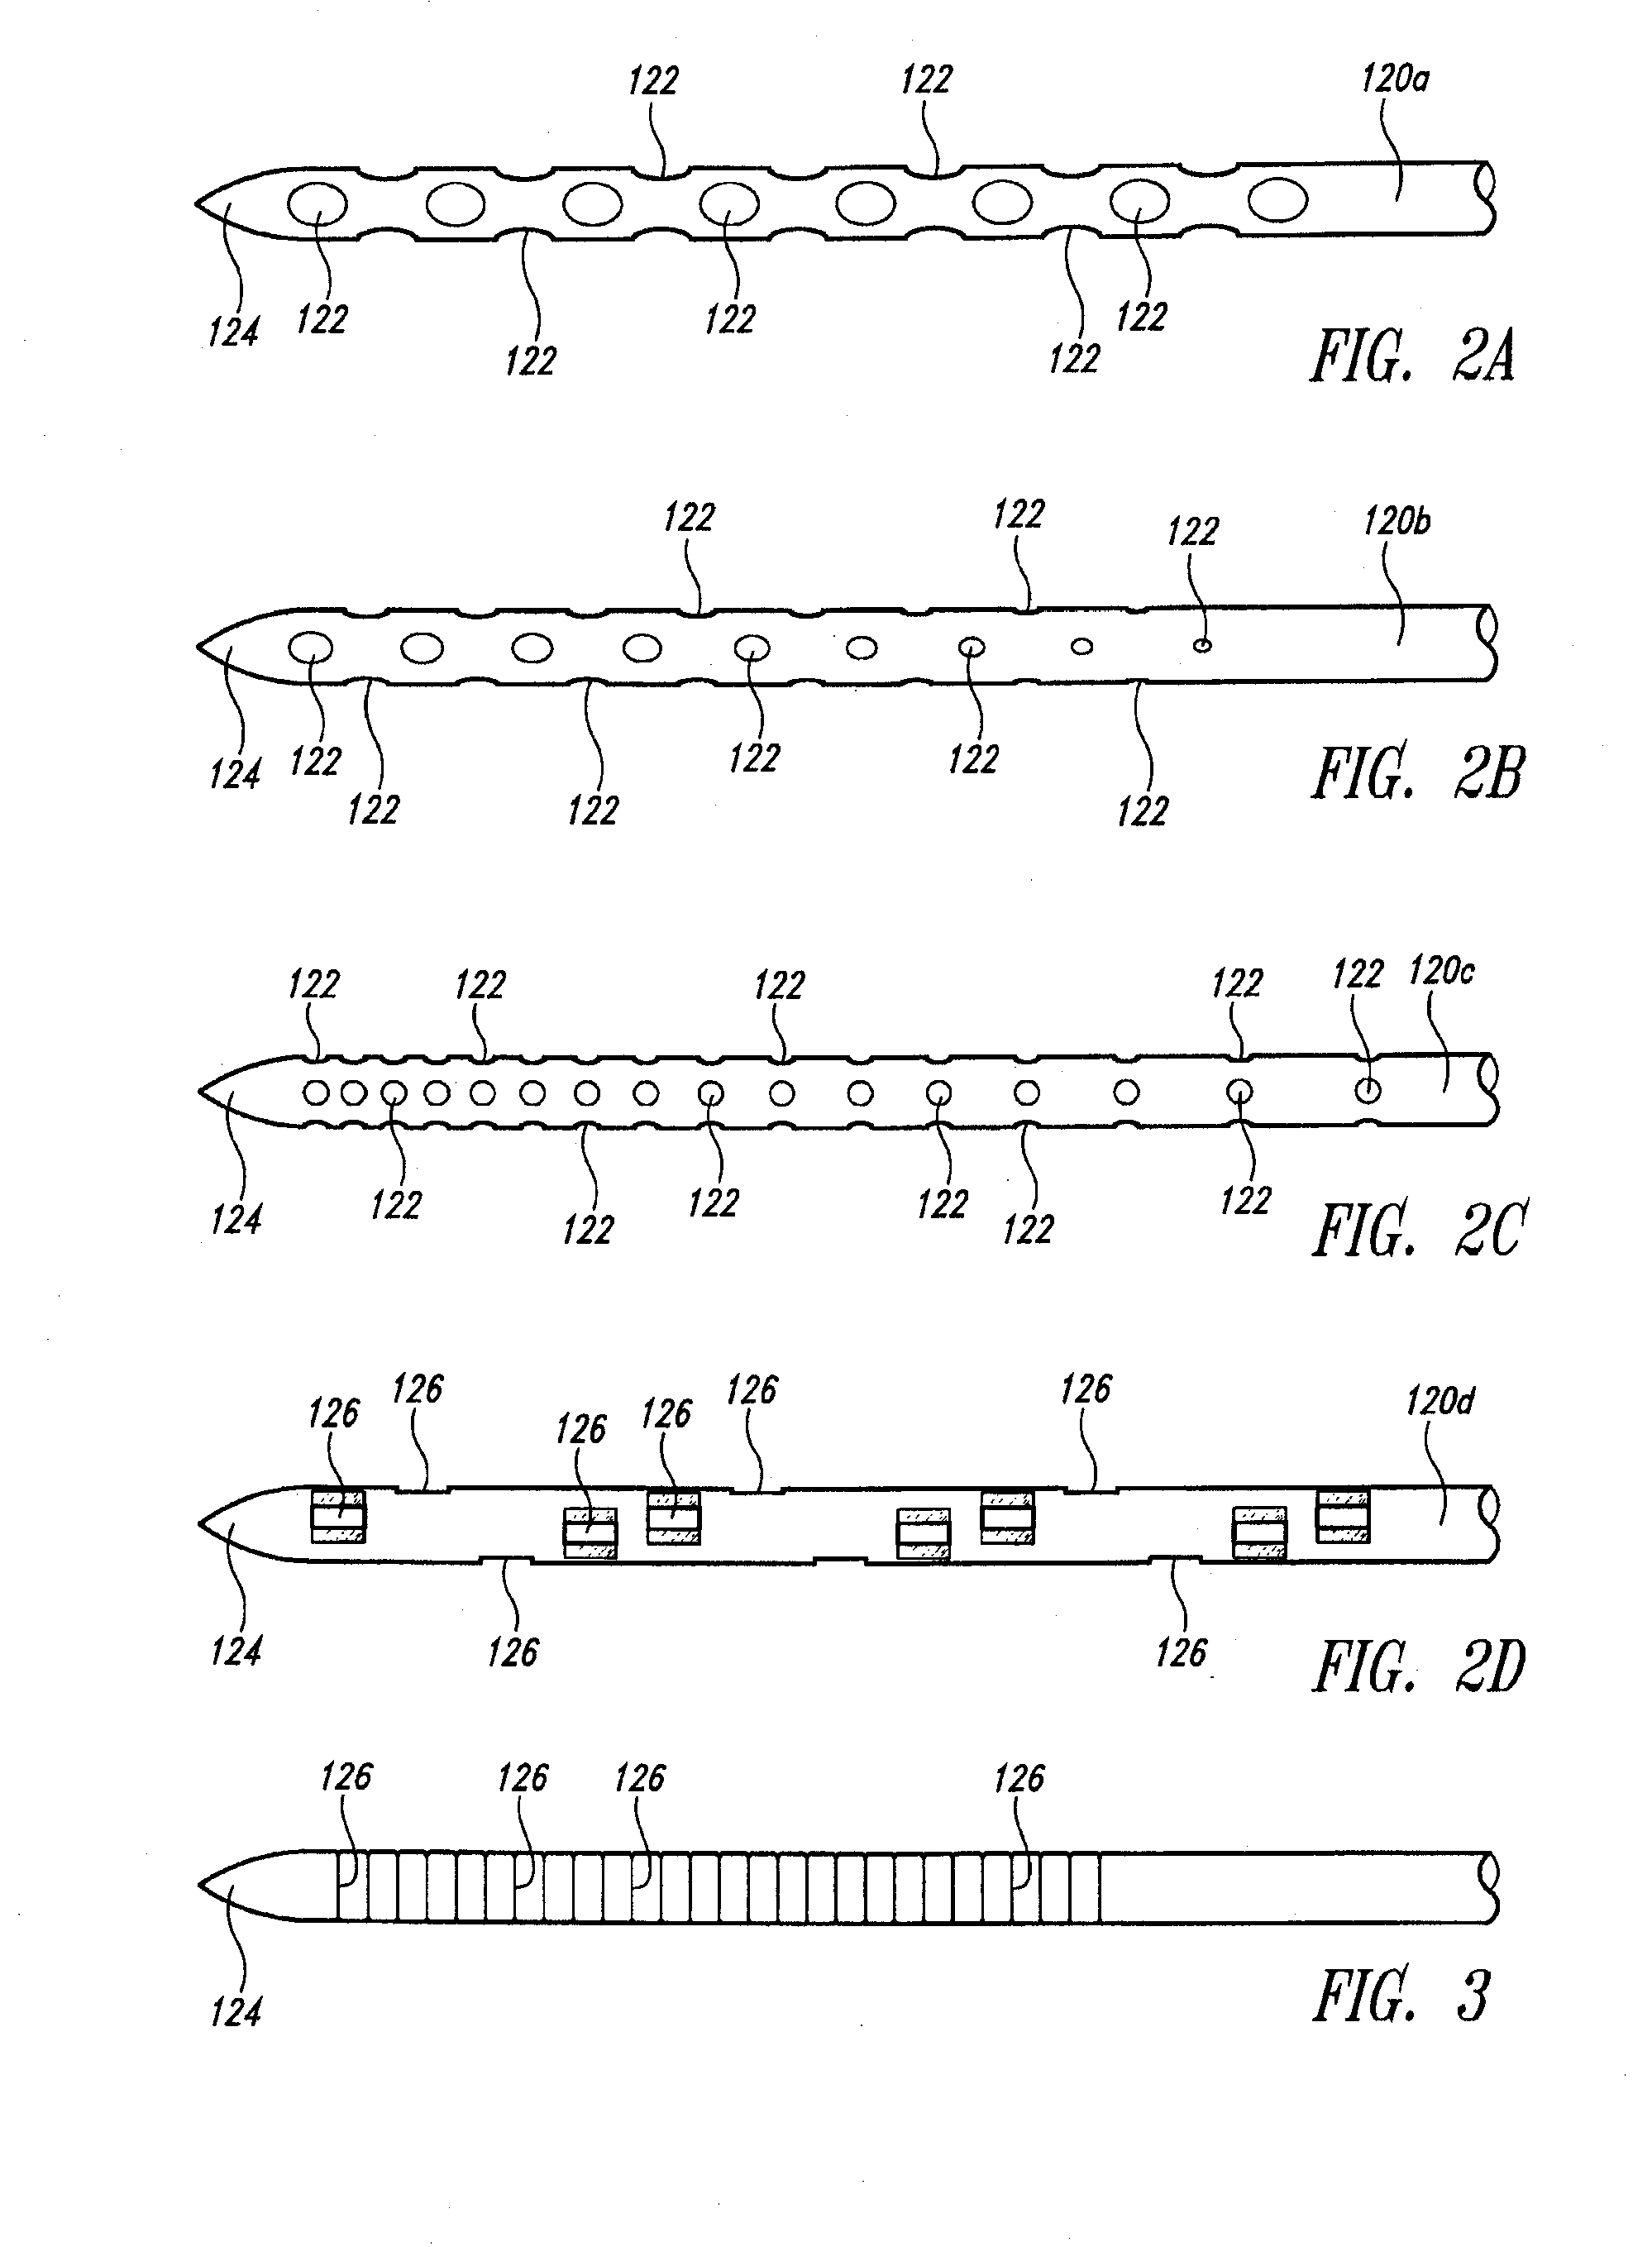 Needle Array Assembly and Method for Delivering Therapeutic Agents